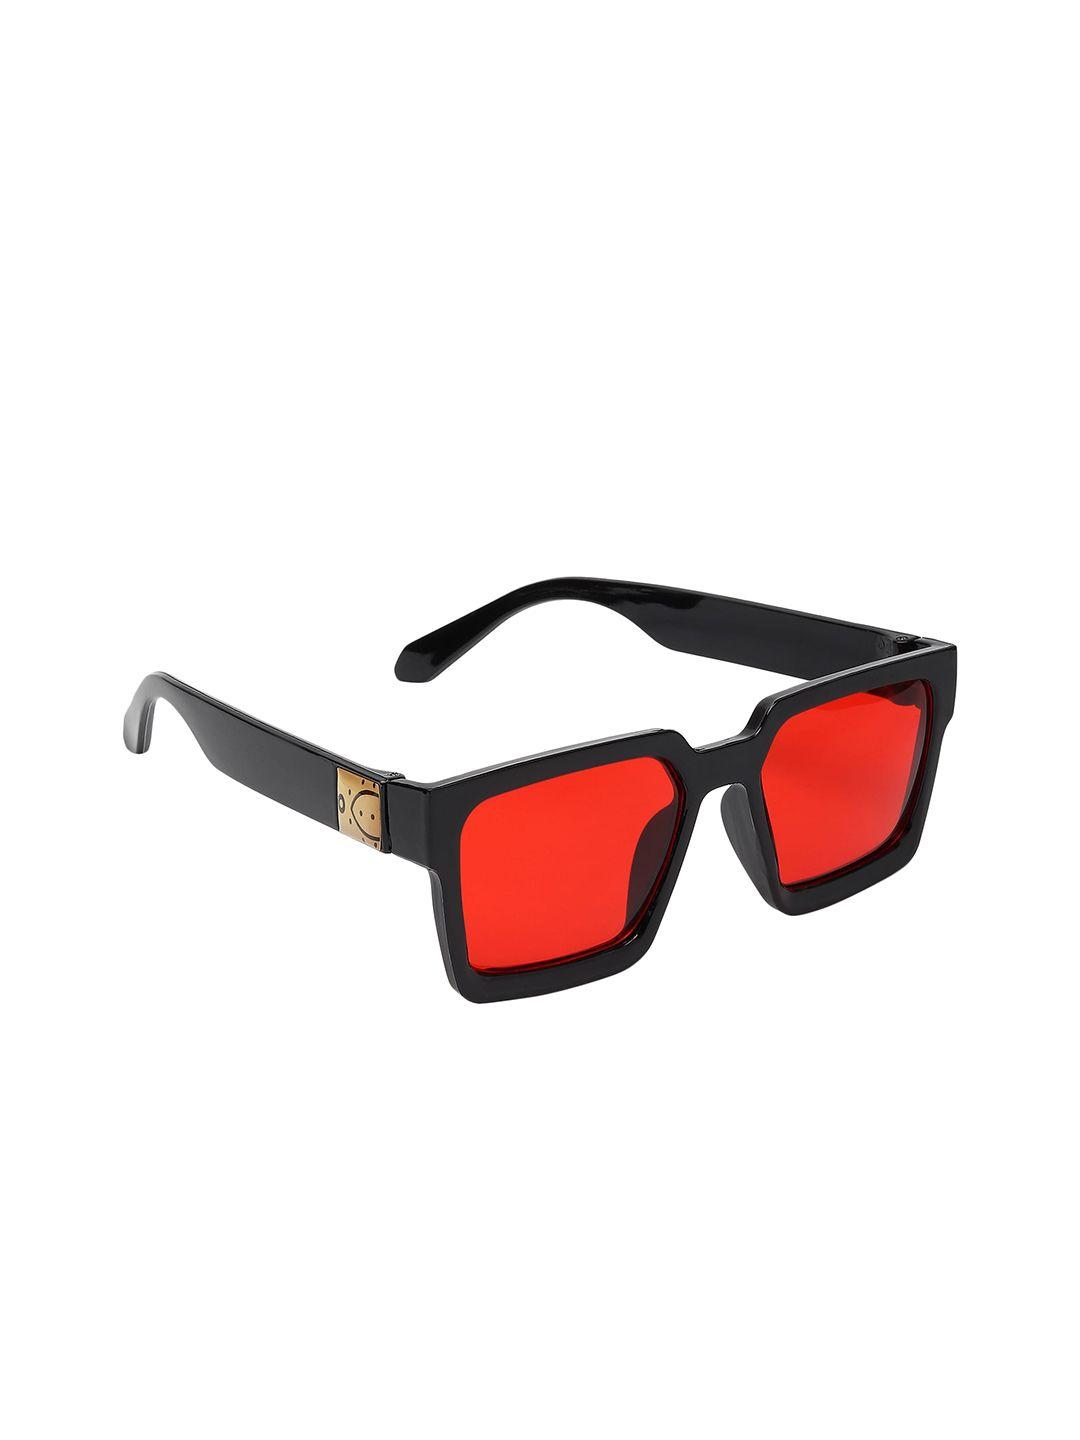 criba unisex square sunglasses with uv protected lens crb_red_jm